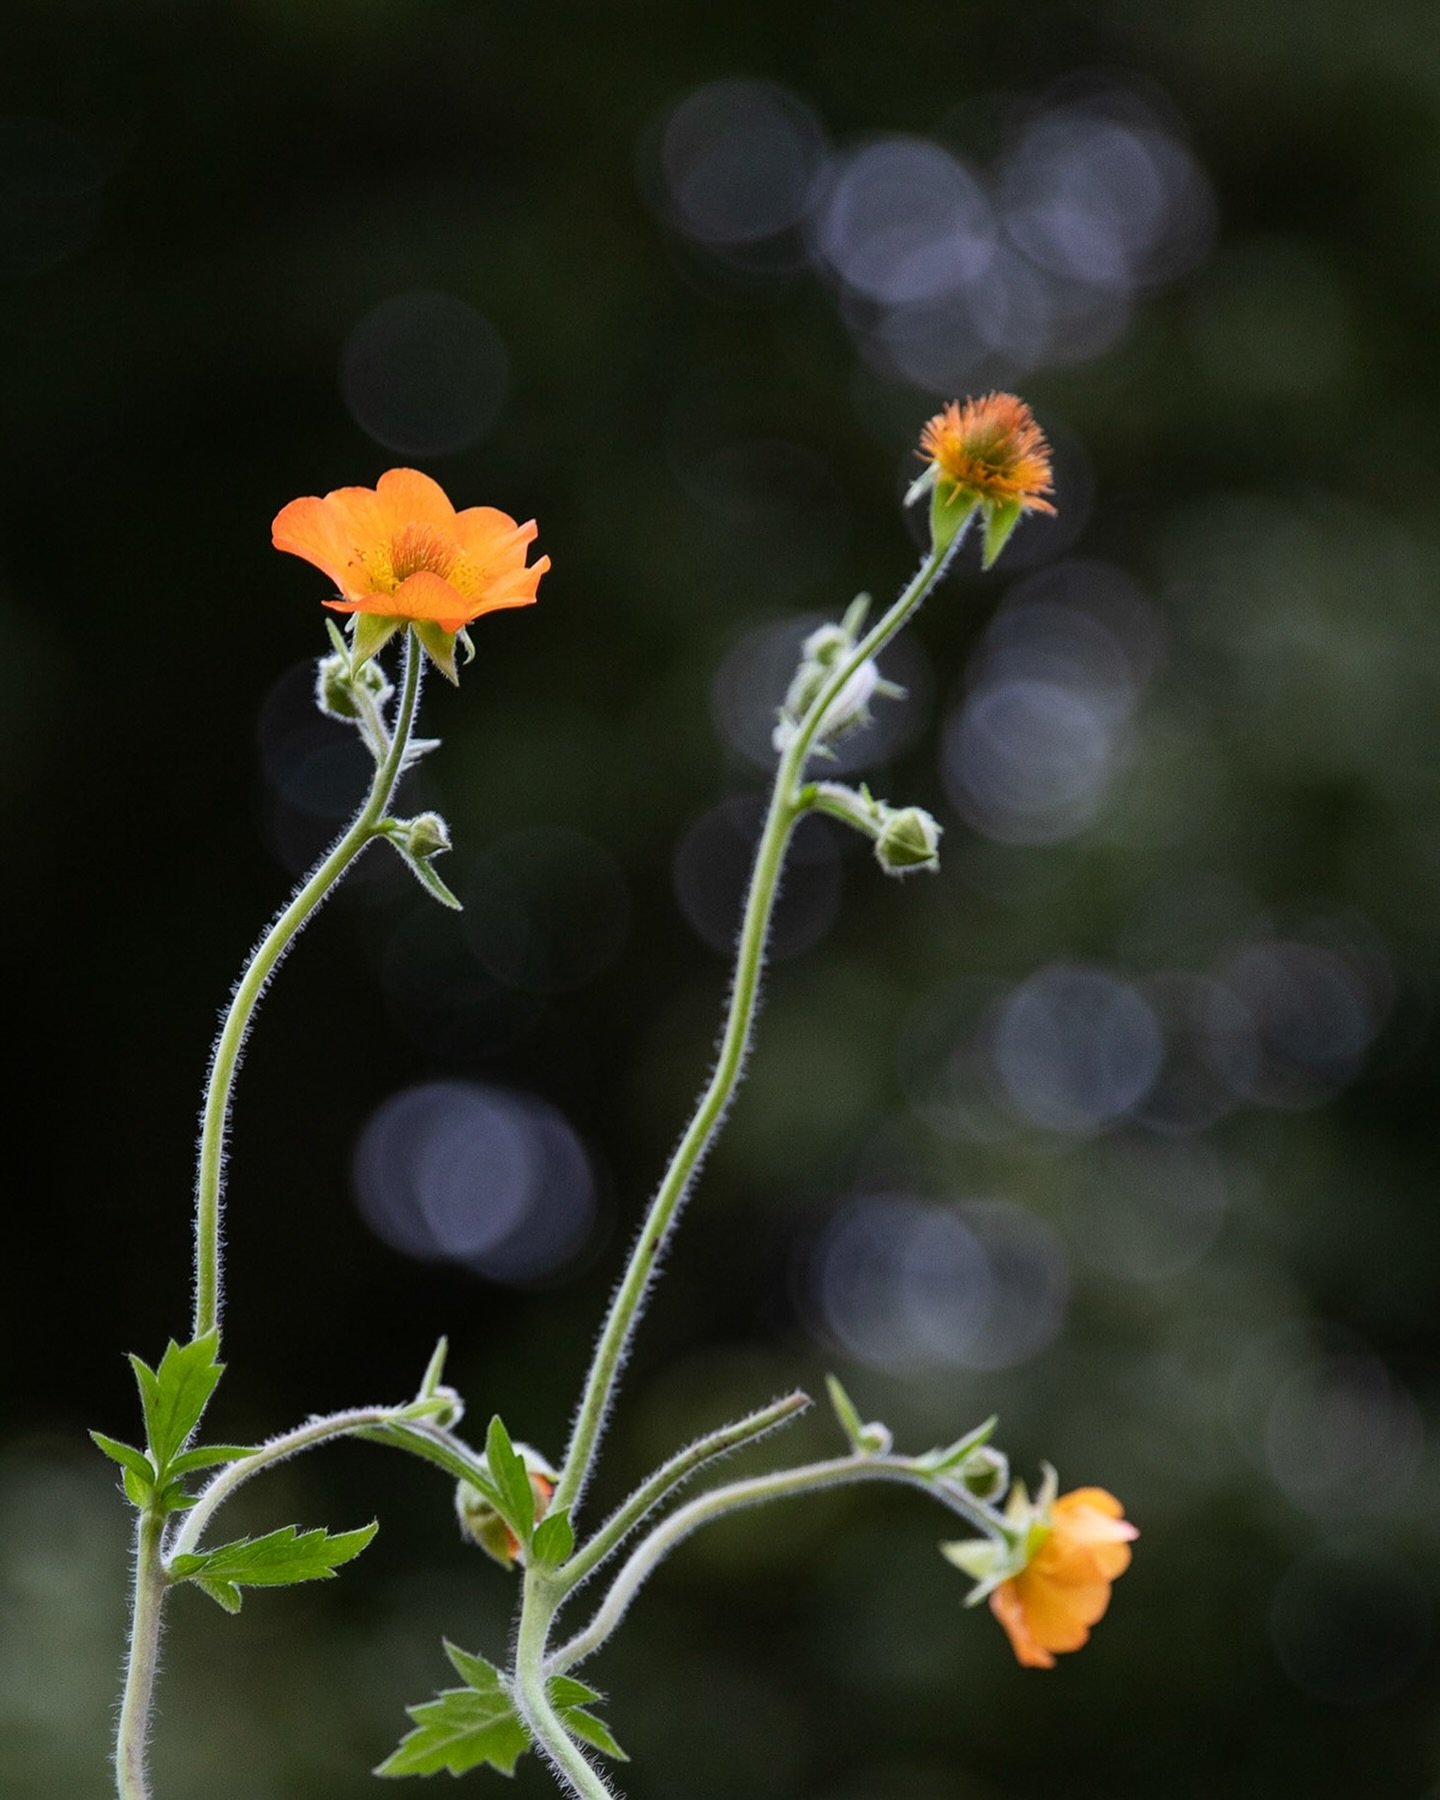 Want flowers for months? This &hellip; Geum &lsquo;Totally tangerine&rdquo;&rsquo; is an astonishingly good grower and pollinators love it. Can be grown in a pot for those without soil and if you keep deadheading the flowers off it will go for absolu